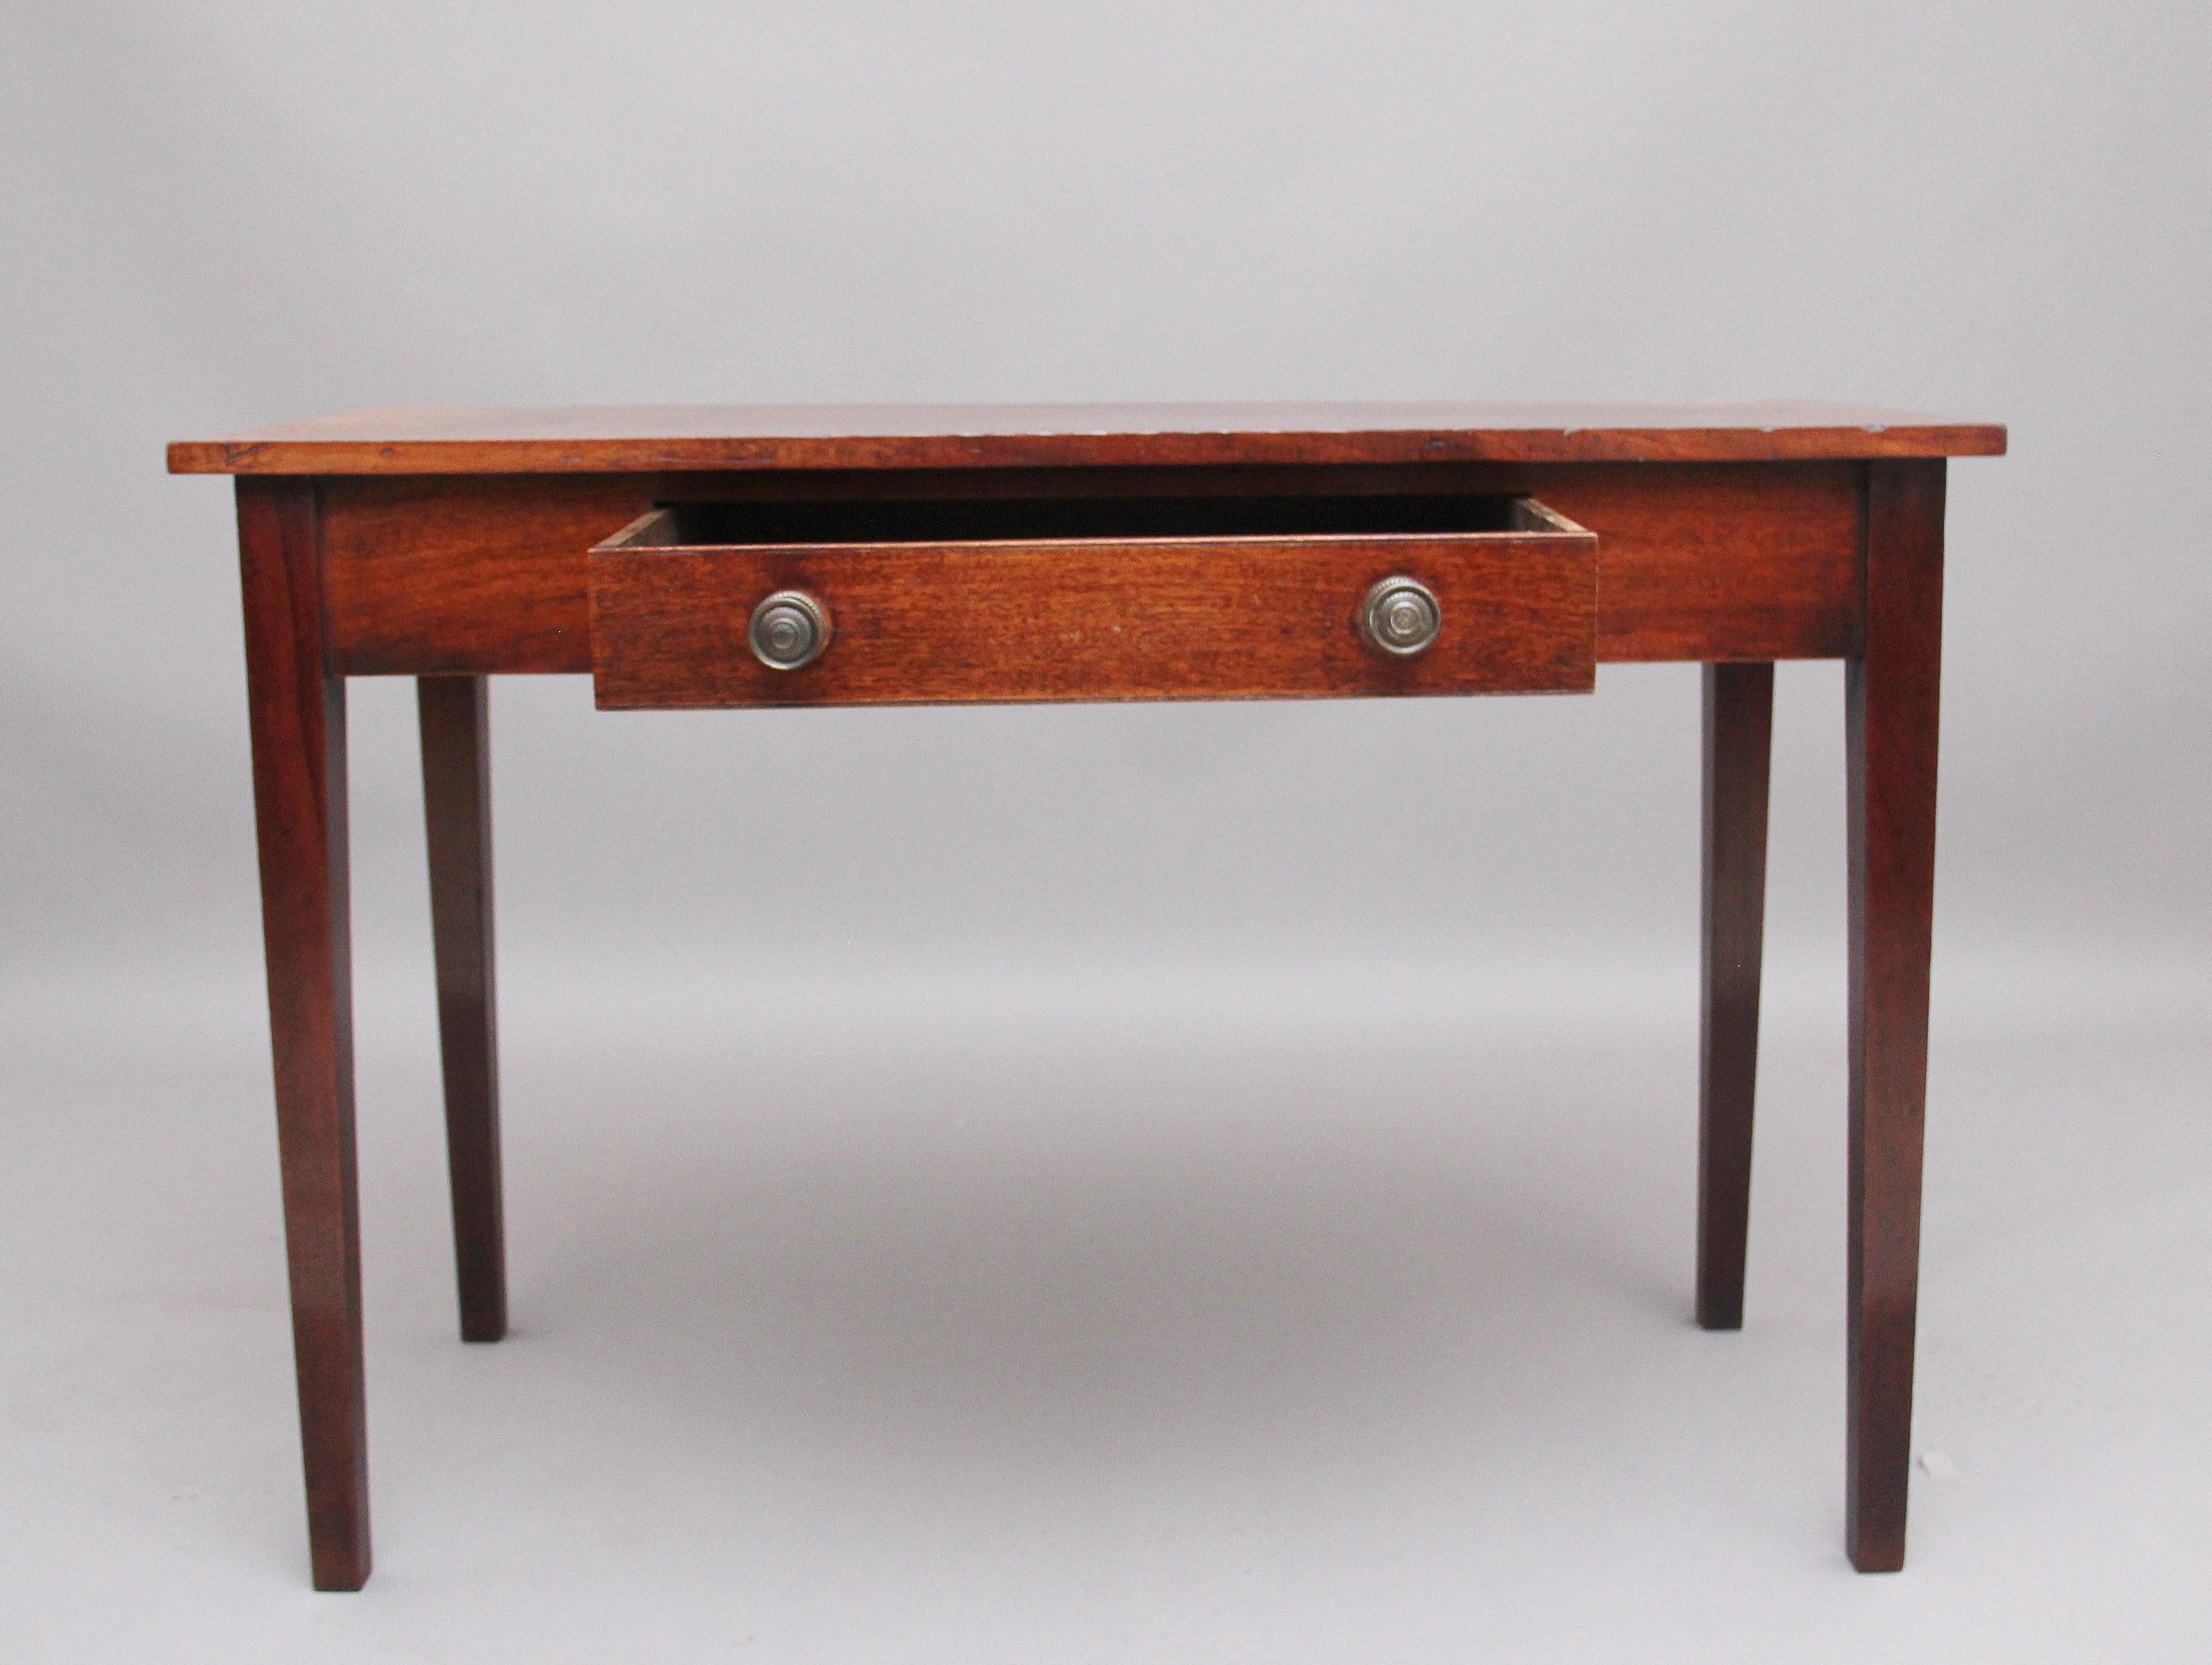 Early 19th century mahogany side table, having a lovely figured top above a single frieze drawer with original turned brass handles, standing on square tapering legs. Circa 1800.